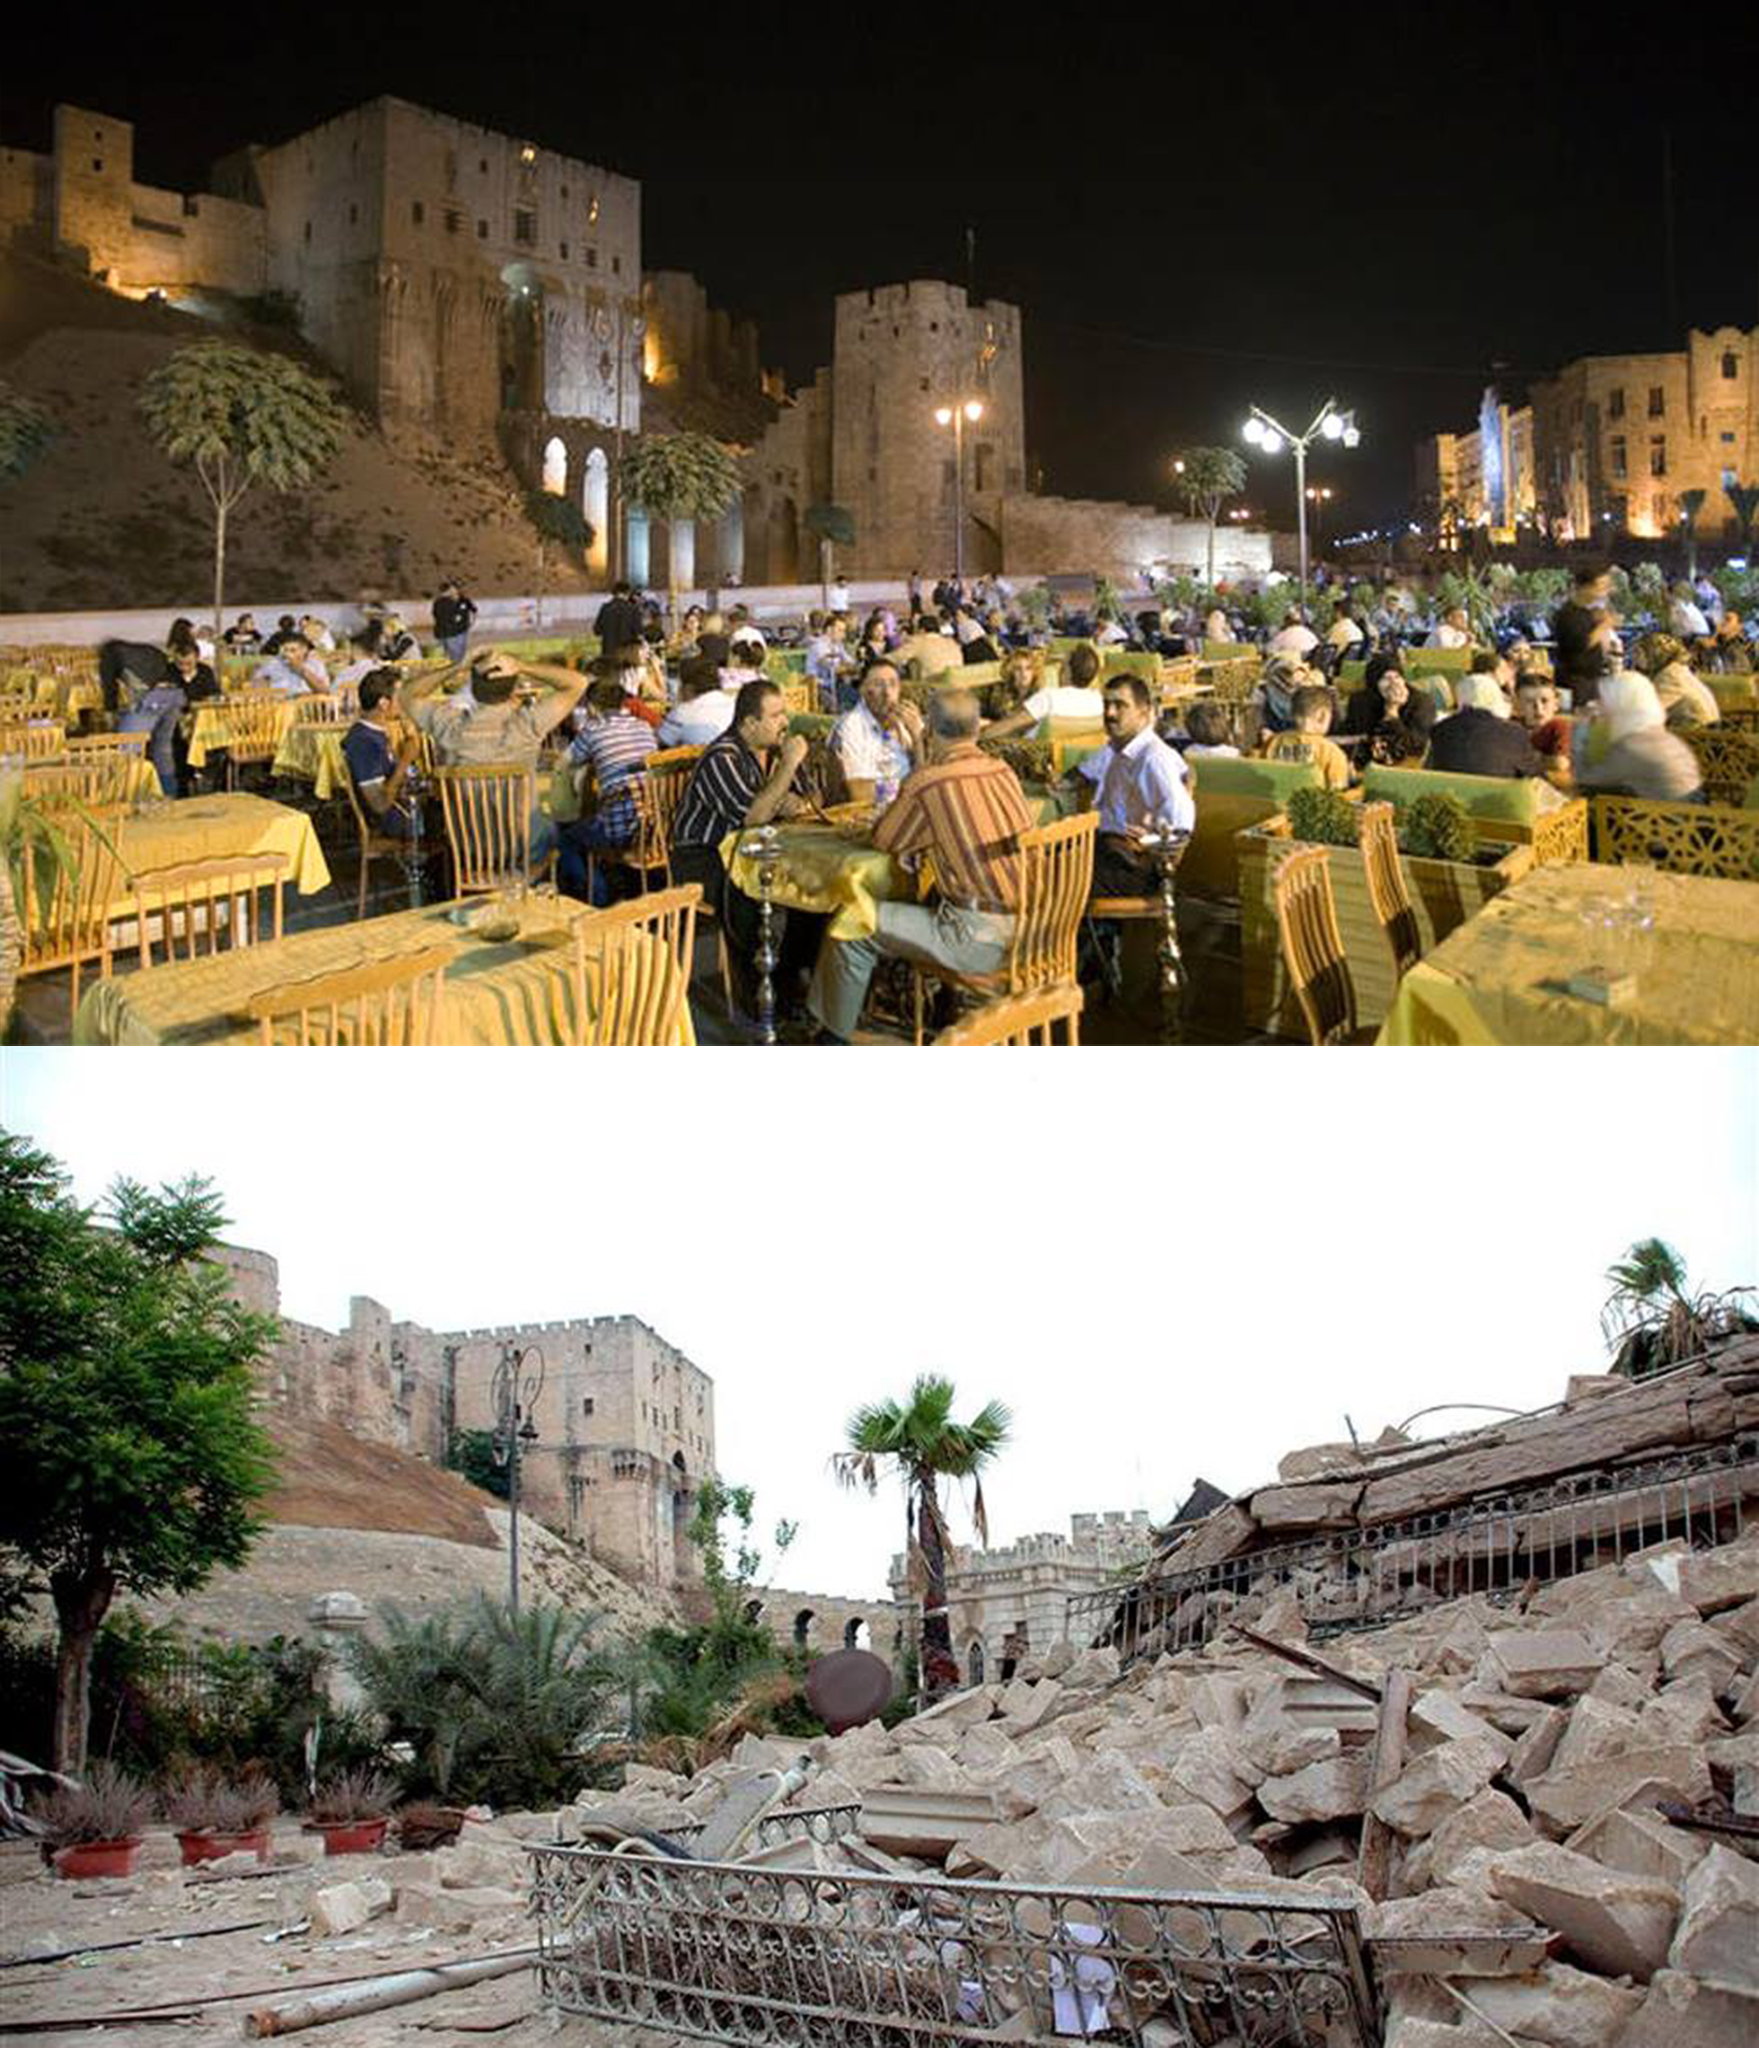 An outdoor dining area with a stunning view is replaced by rubble in the aftermath